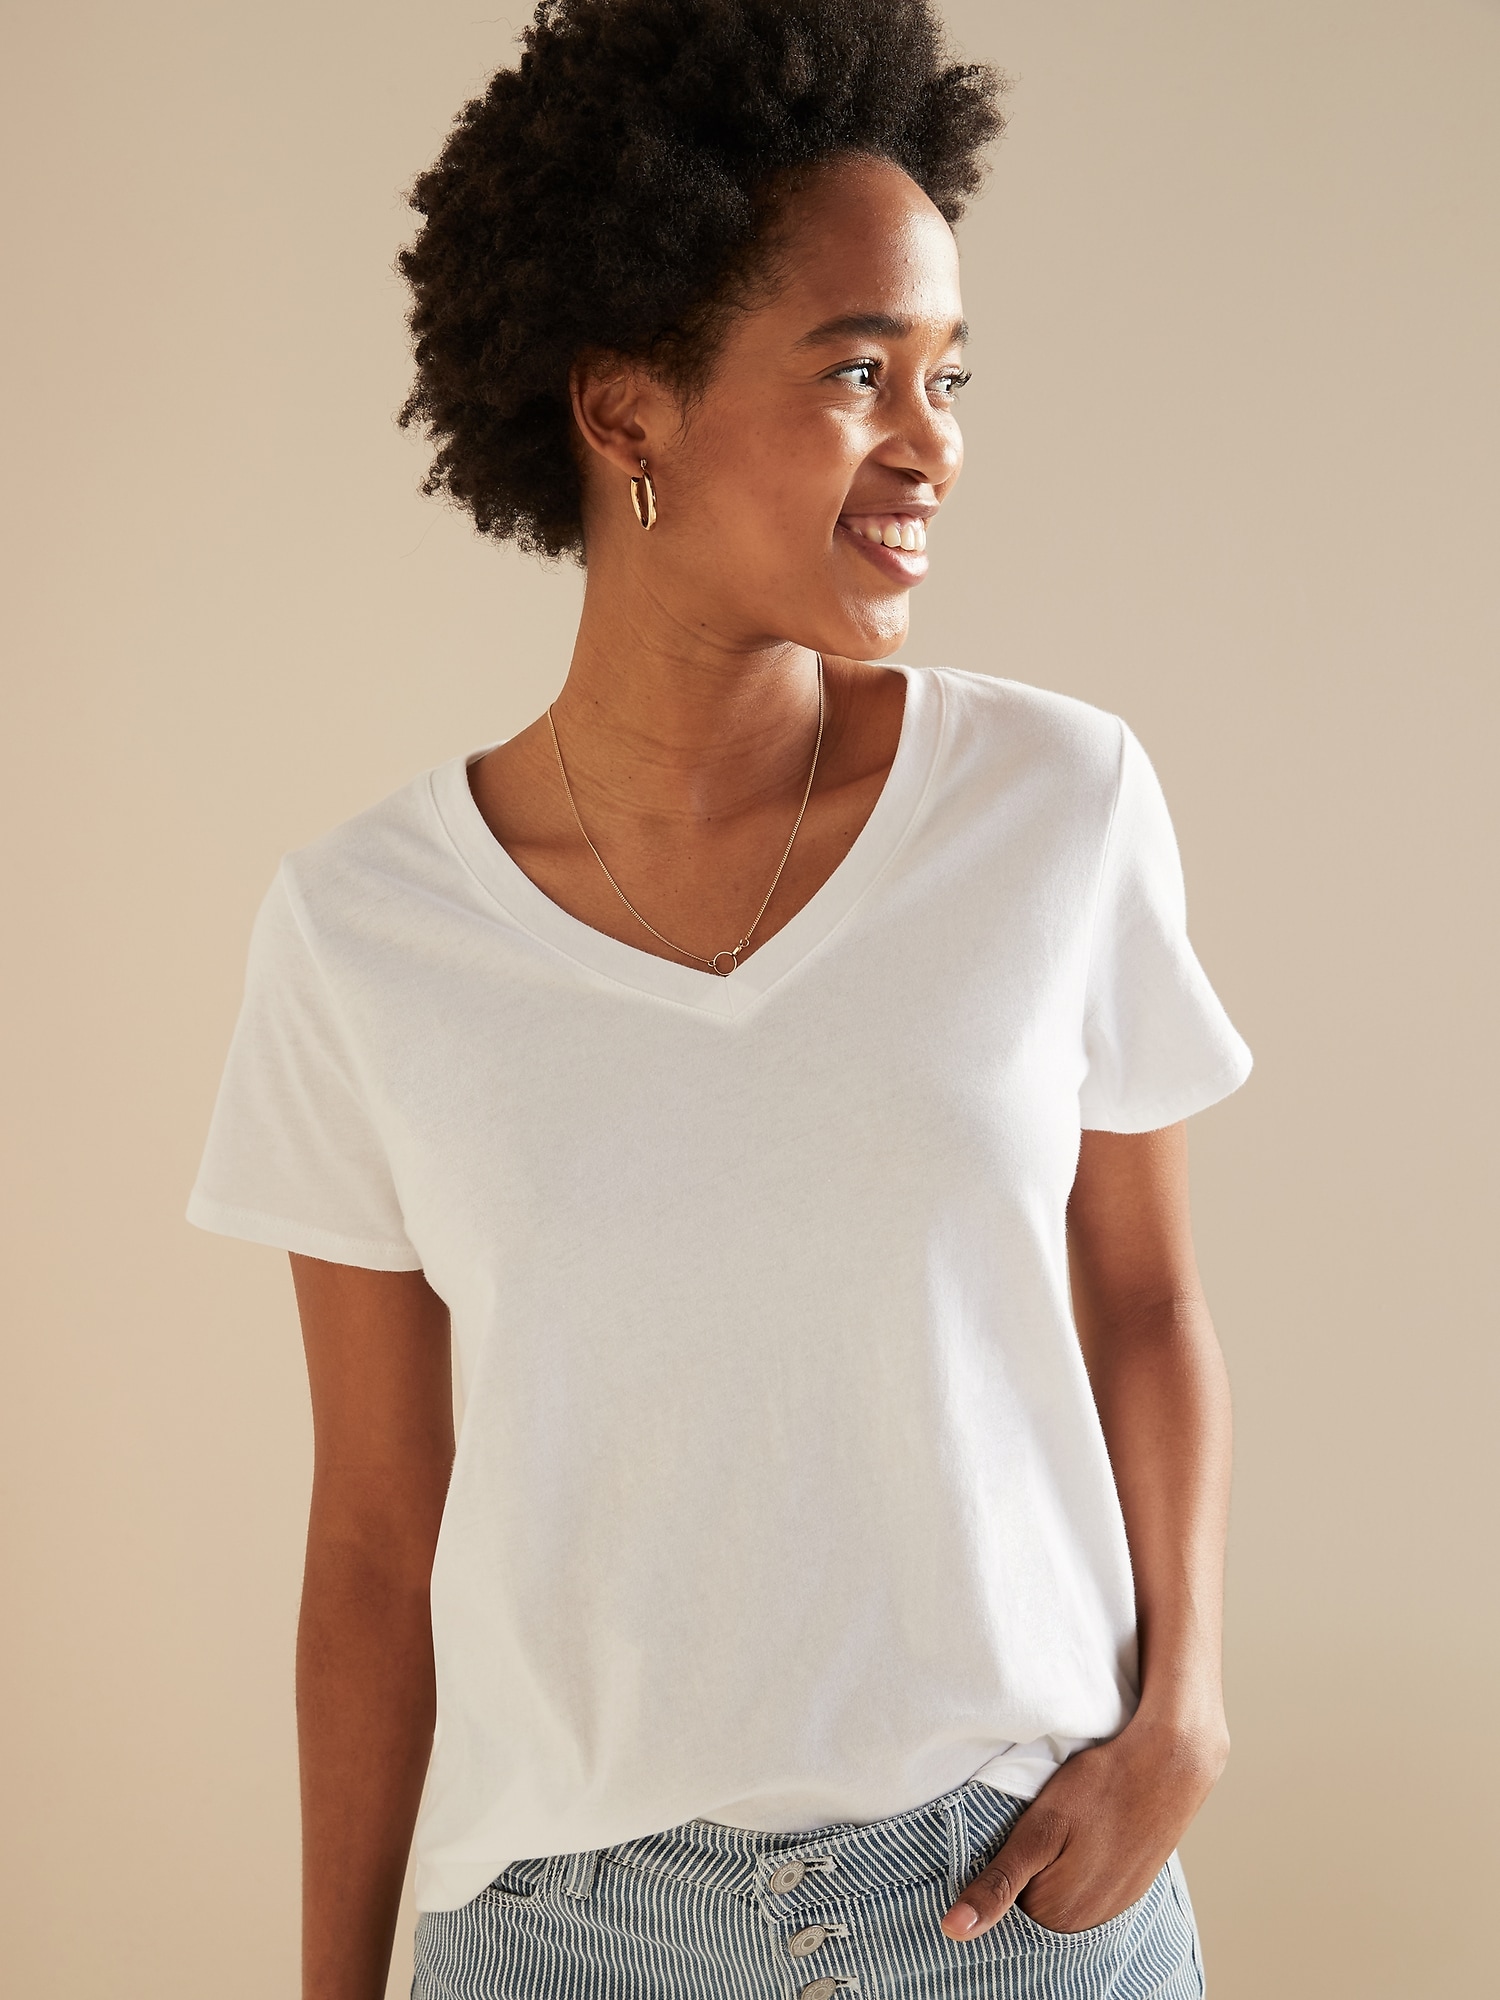 add your logo image or text on this shirt. Black Women's V-Neck T-Shirt